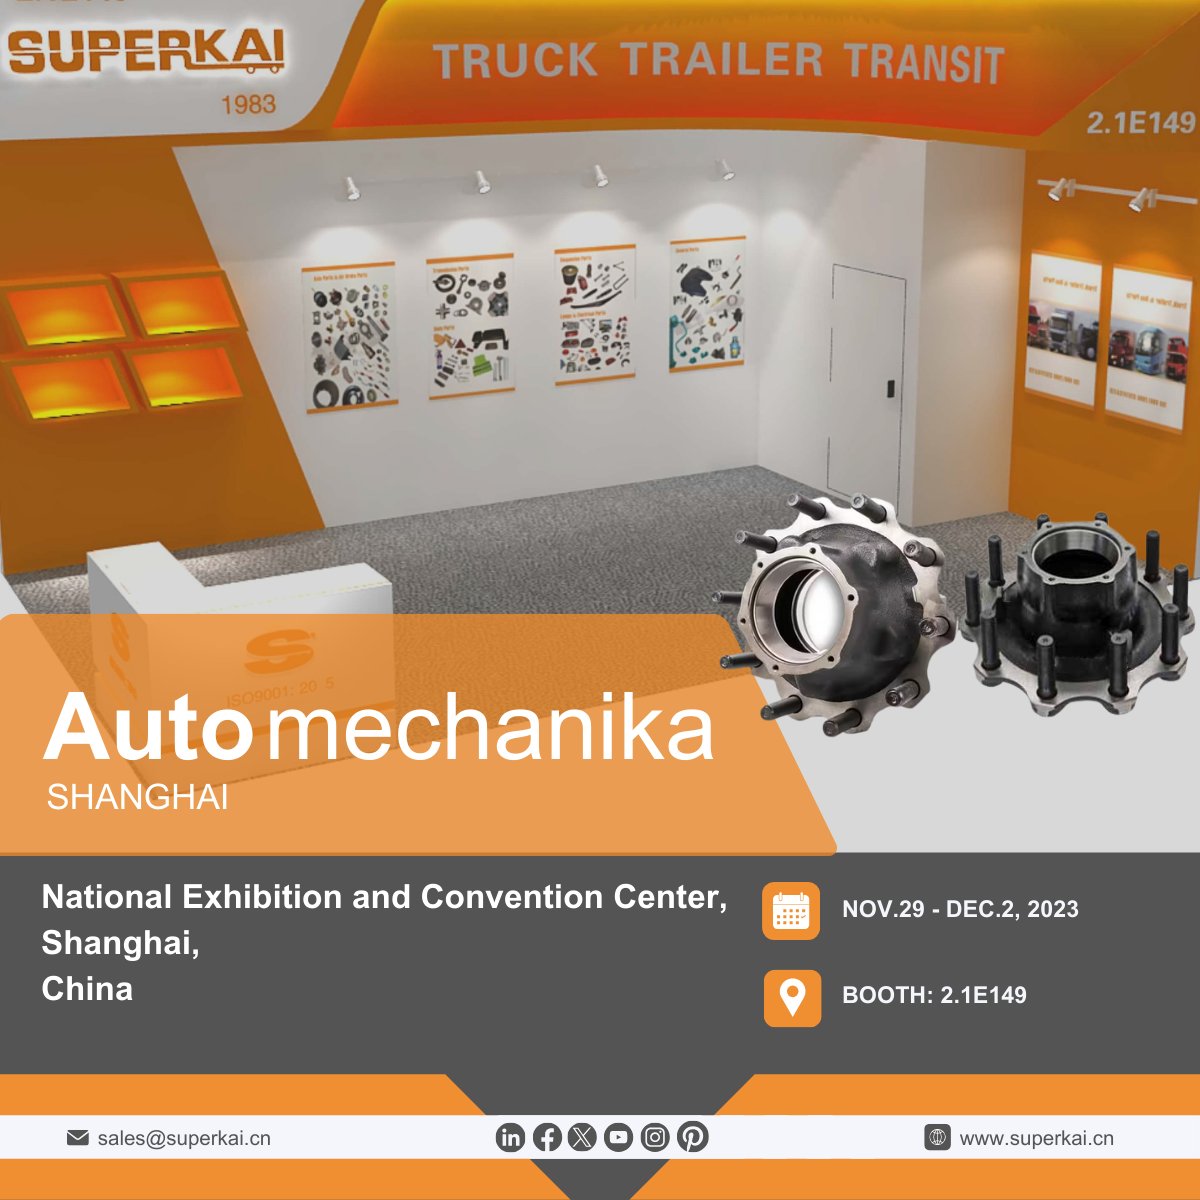 We are part of Automechanika Shanghai 2023. Look forward to see you at our booth.  
NOV.29 - DEC.2,2023 NECC, SHANGHAI 
BOOTH NO: 2.1E149  
#AMS #automechanikash #automechanikashanghai #automechanika #automotive #OEM #aftermarket #supplychain #automechanika2023 #cvpart